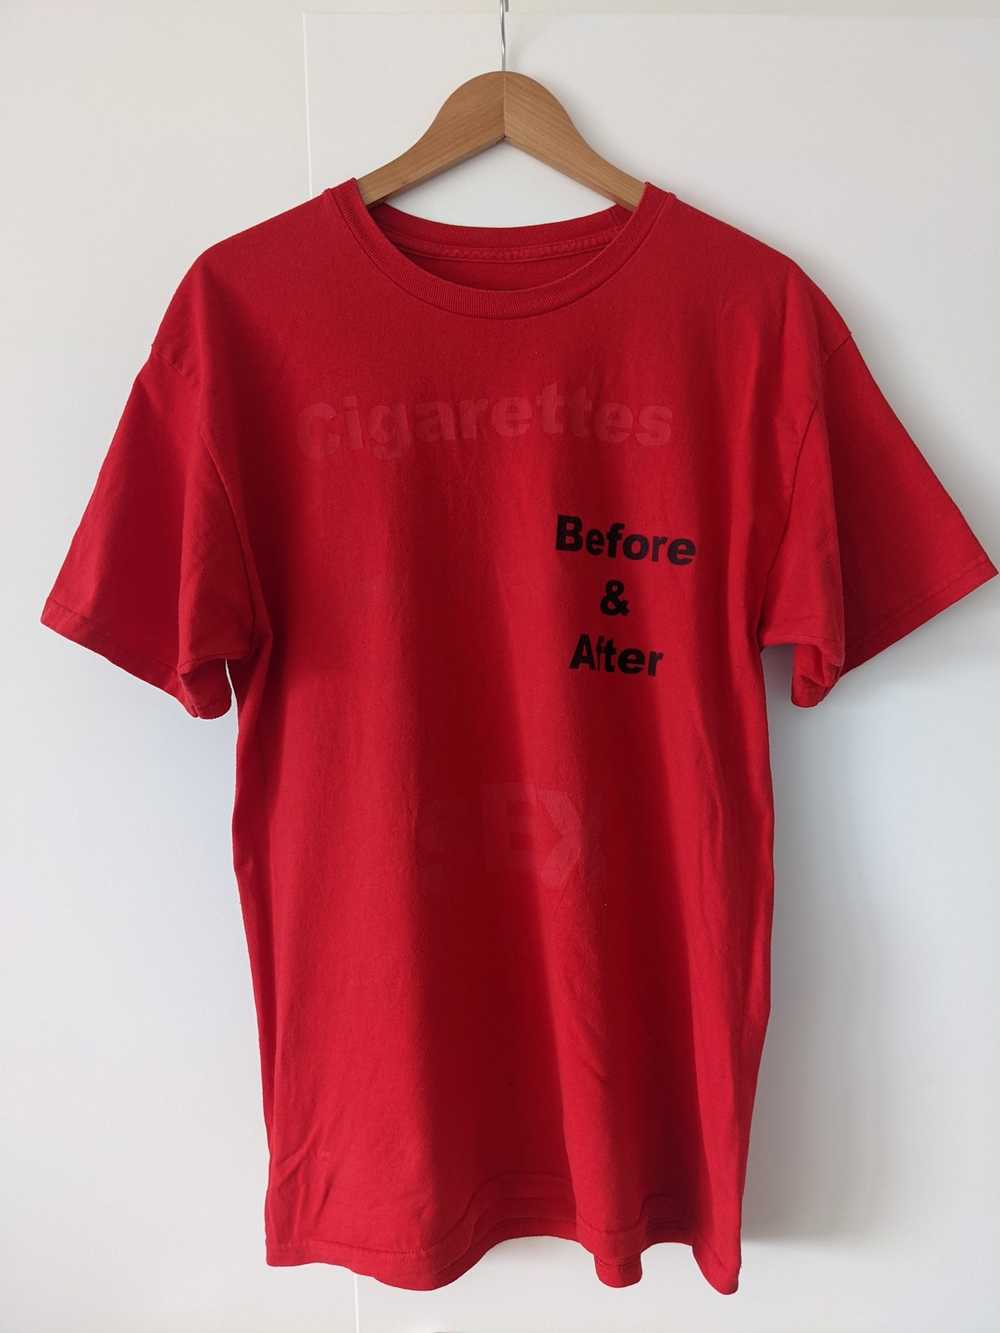 Pleasures Cigarettes Before & After Sex Tee - image 1